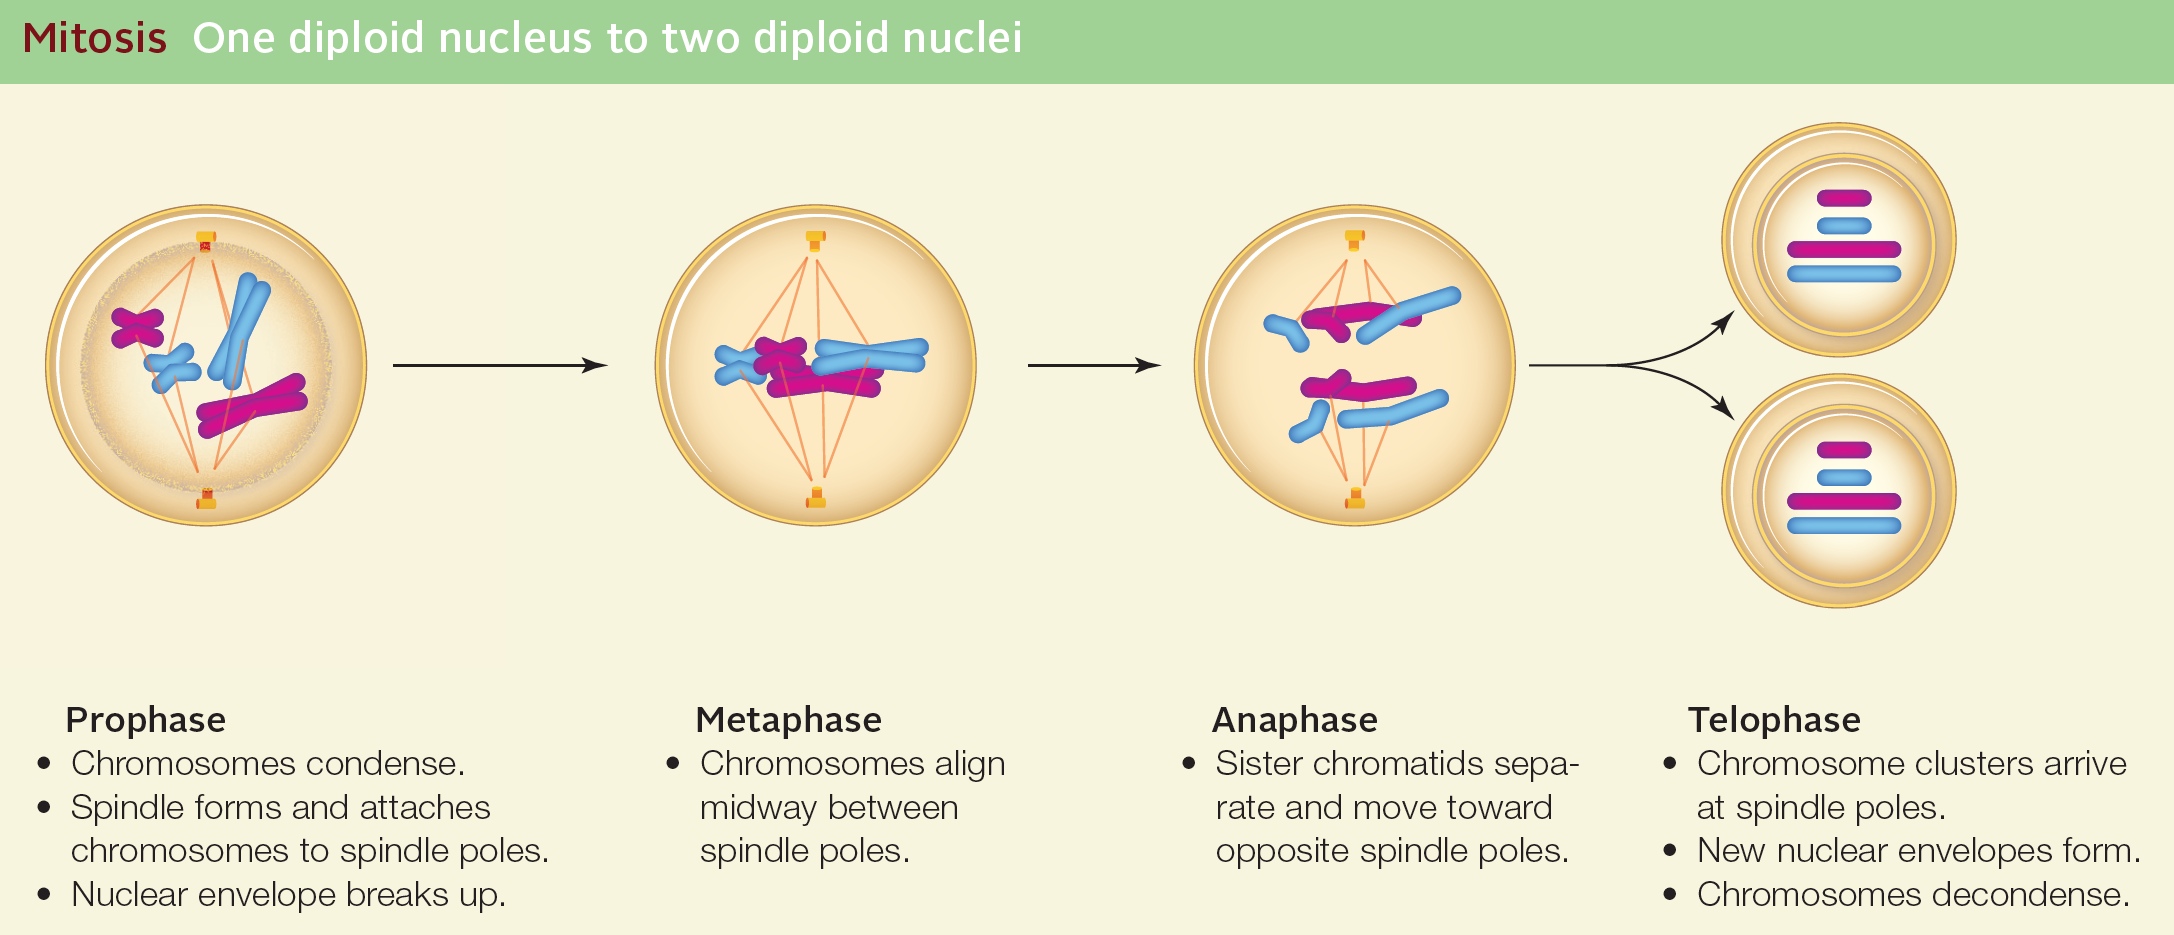 Mitosis One diploid nucleus to two diploid nuclei